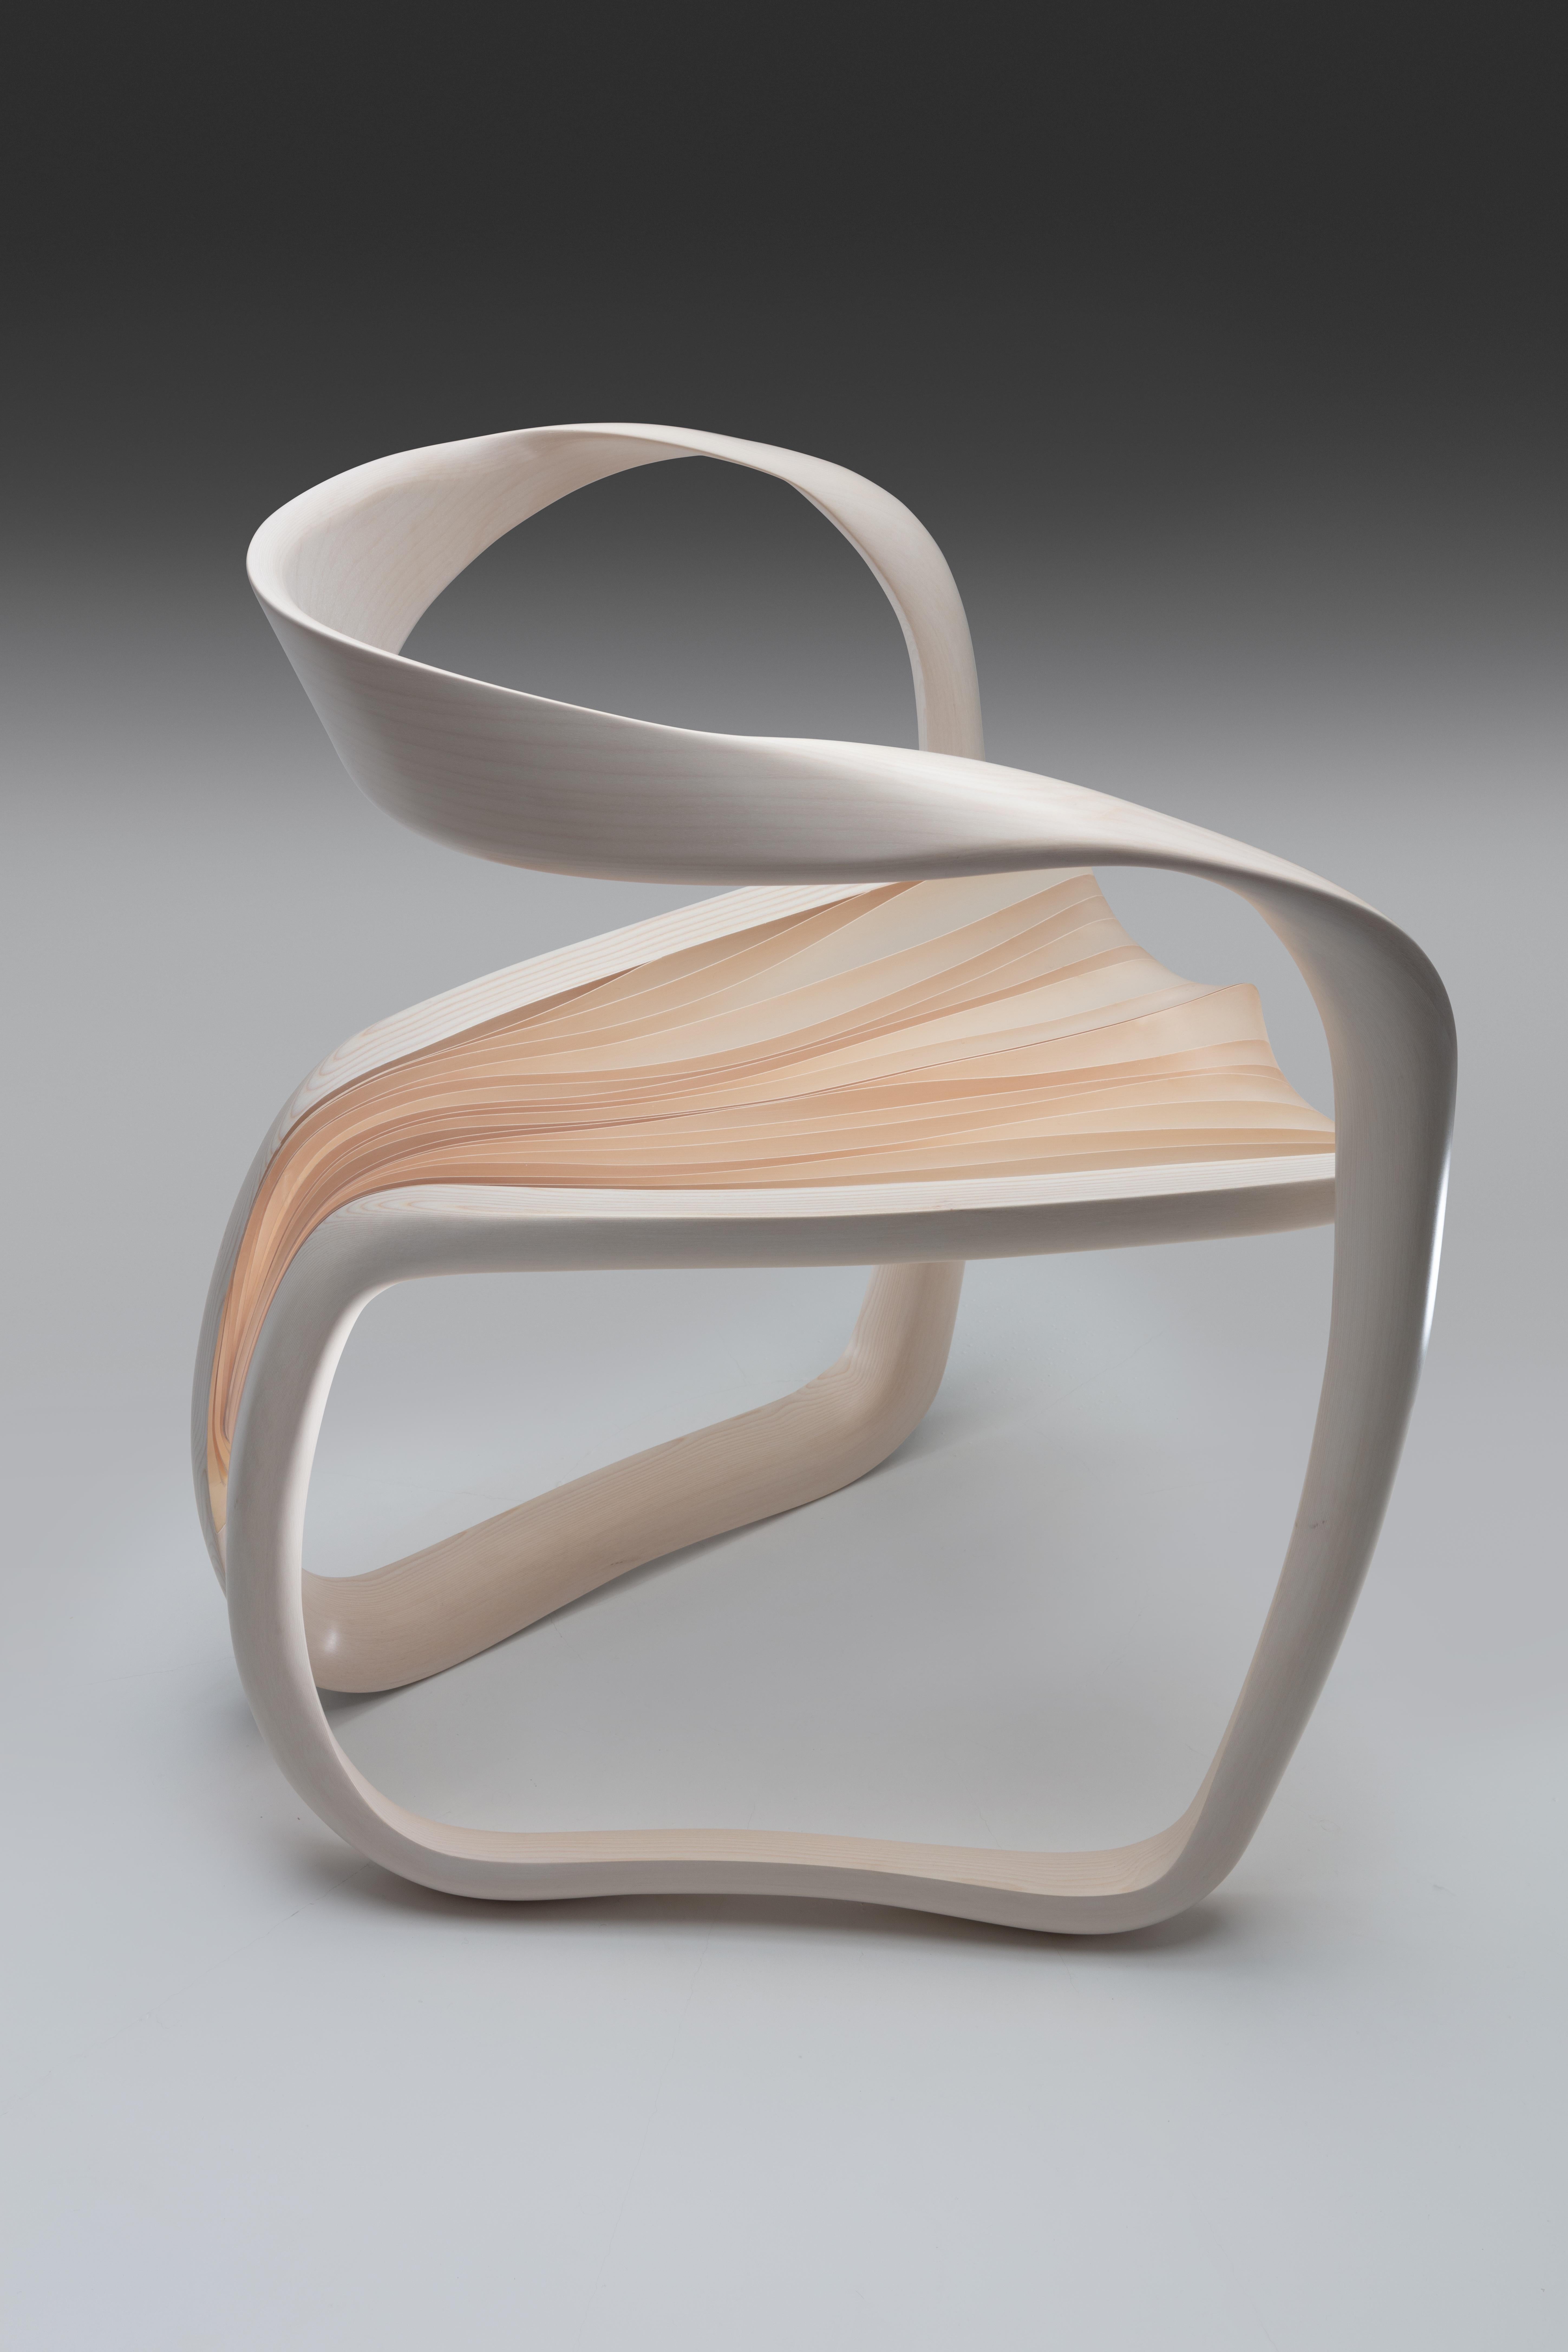 Carved Marc Fish Ethereal Chair Sycamore and Resin Organic Sculptural Design For Sale